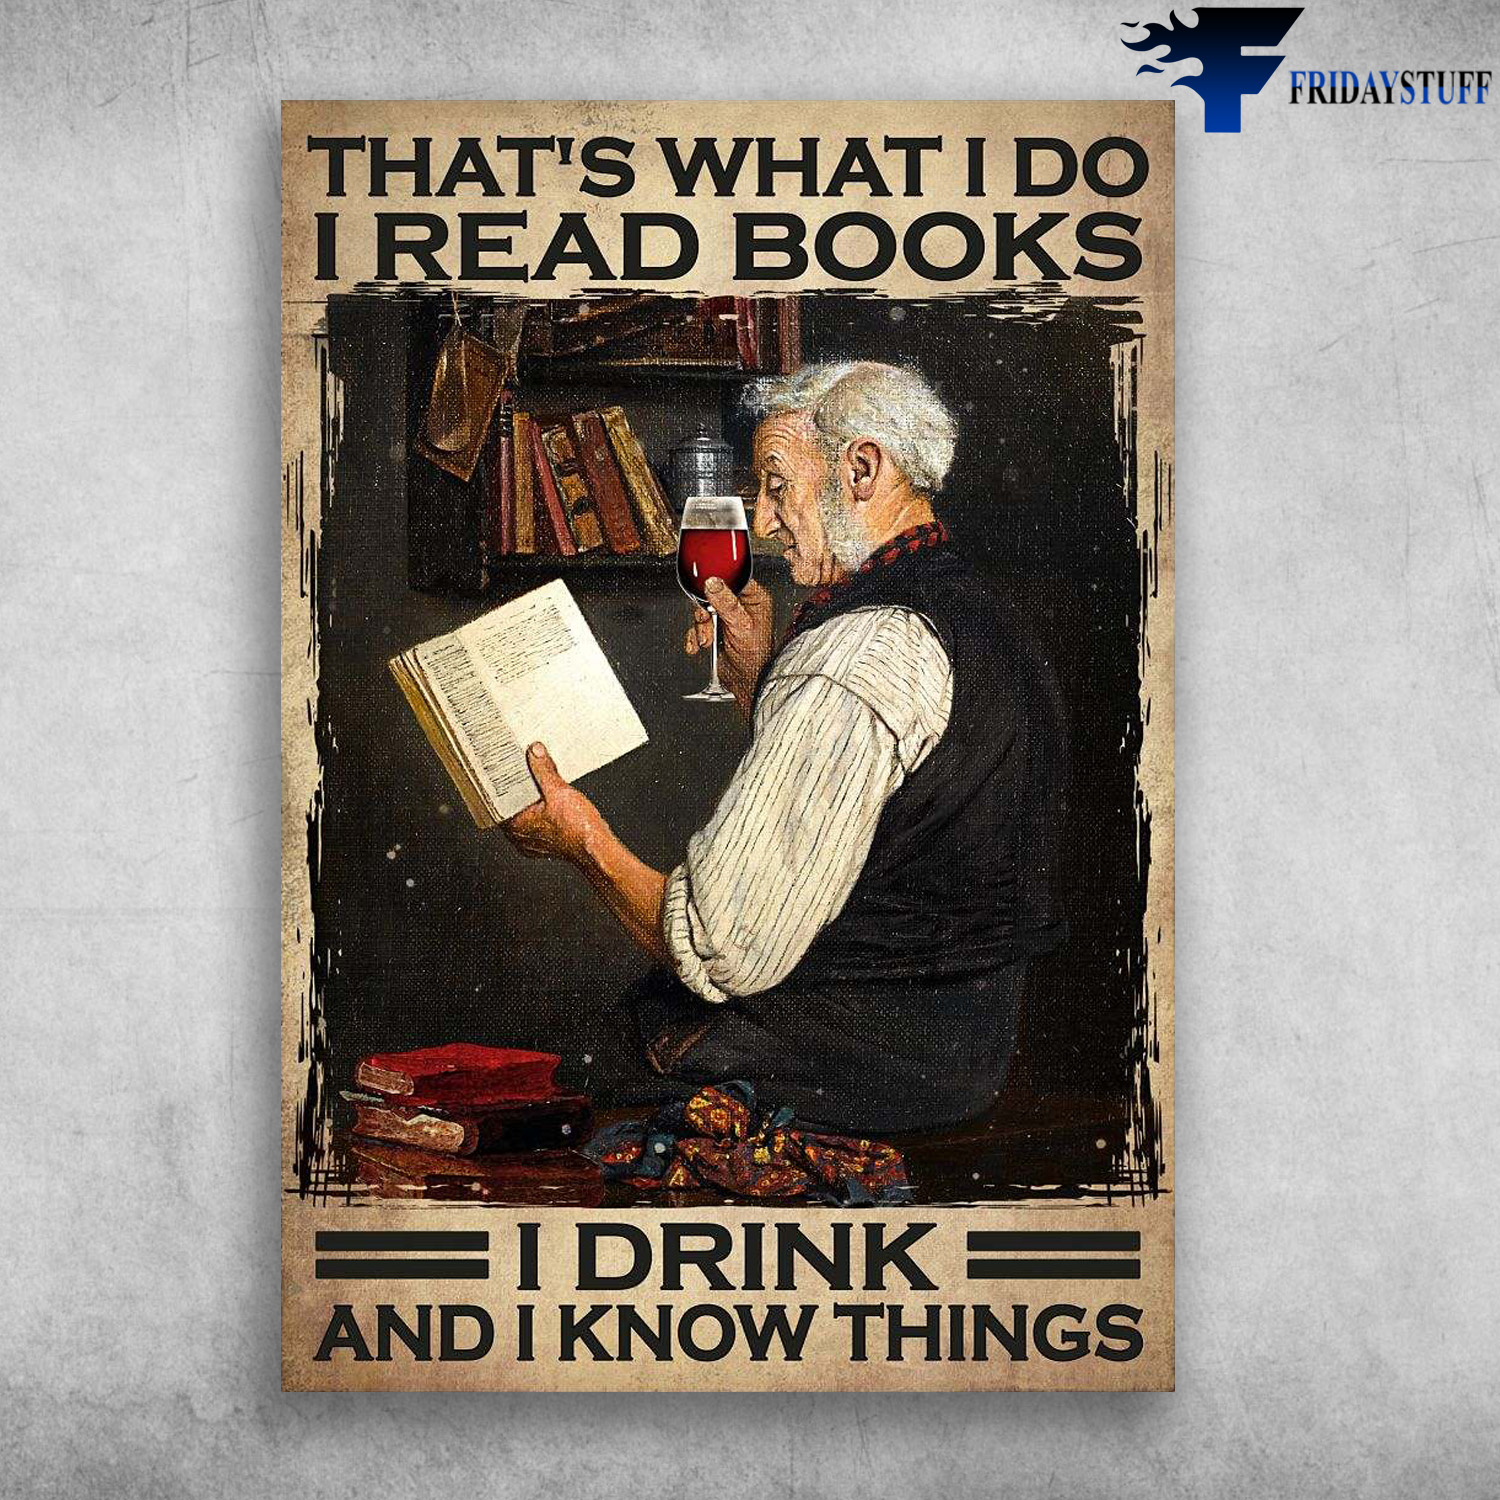 Old Man Reading, Book And Wine - That's What I Do, I Read Books, I Drink, And I Know Things